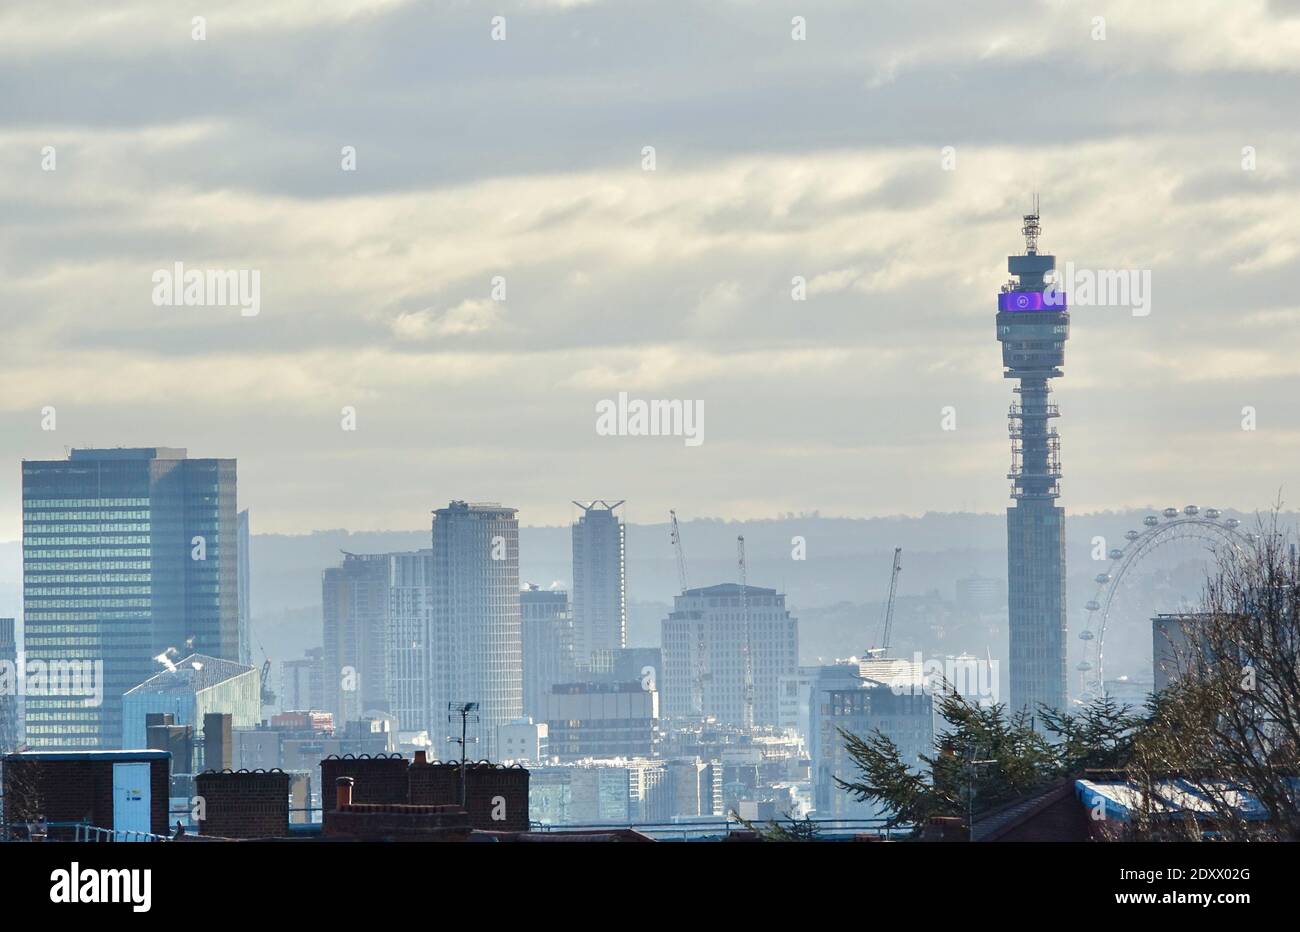 Cityscape of Central London on a misty morning from Holly Mount, Hampstead. BT Tower and the London Eye visible from the view. Stock Photo